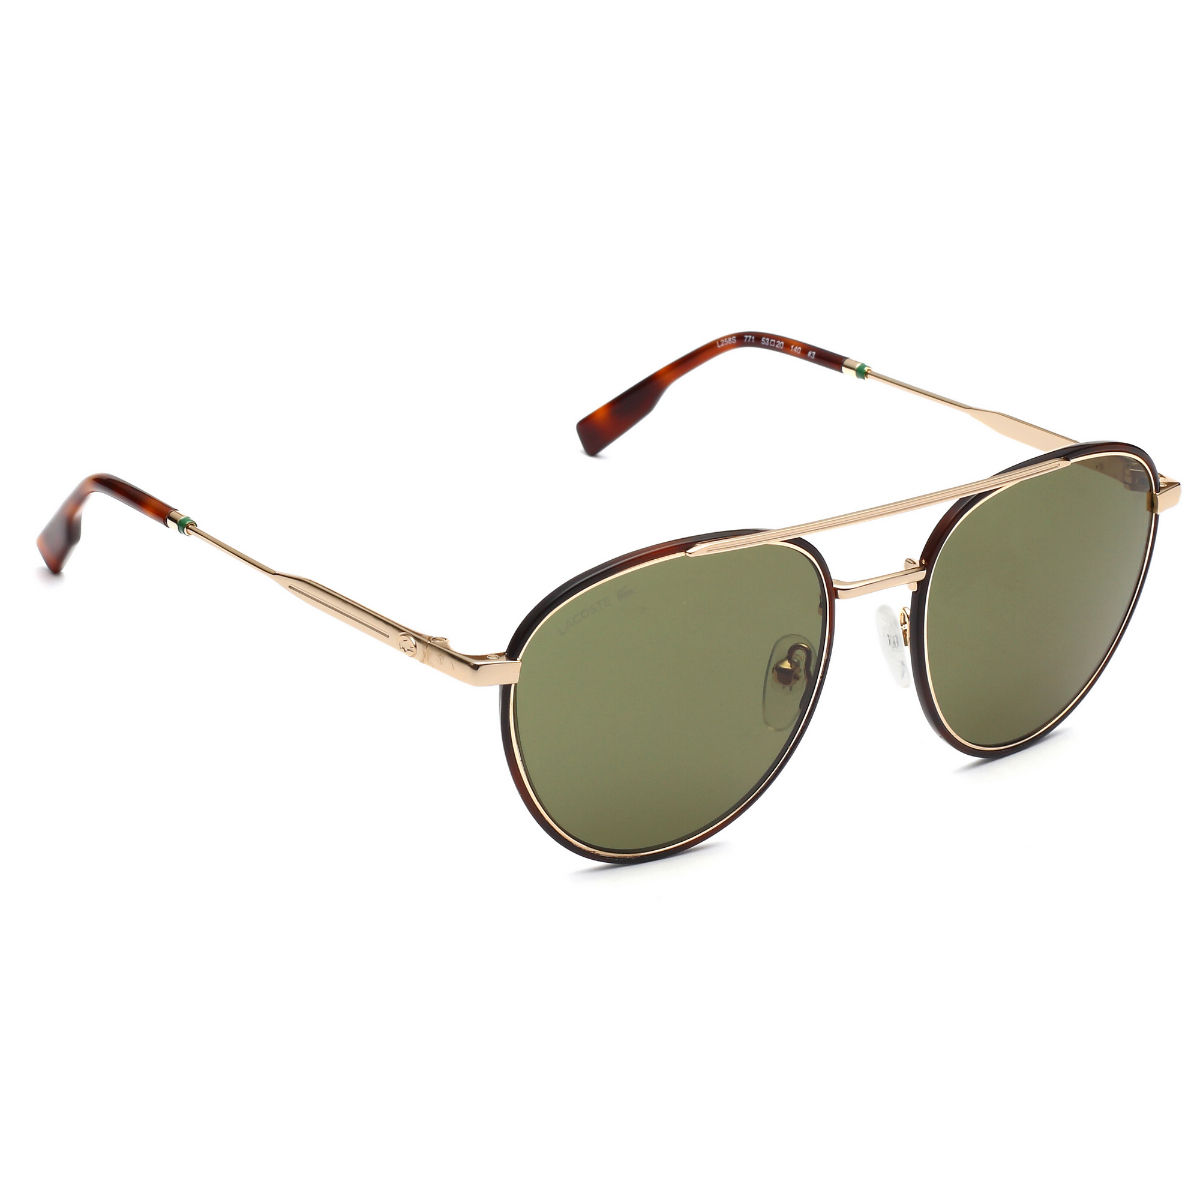 Lacoste Unisex Sunglasses - Mirrored Lens Beige/Gold Round Frame | LAC